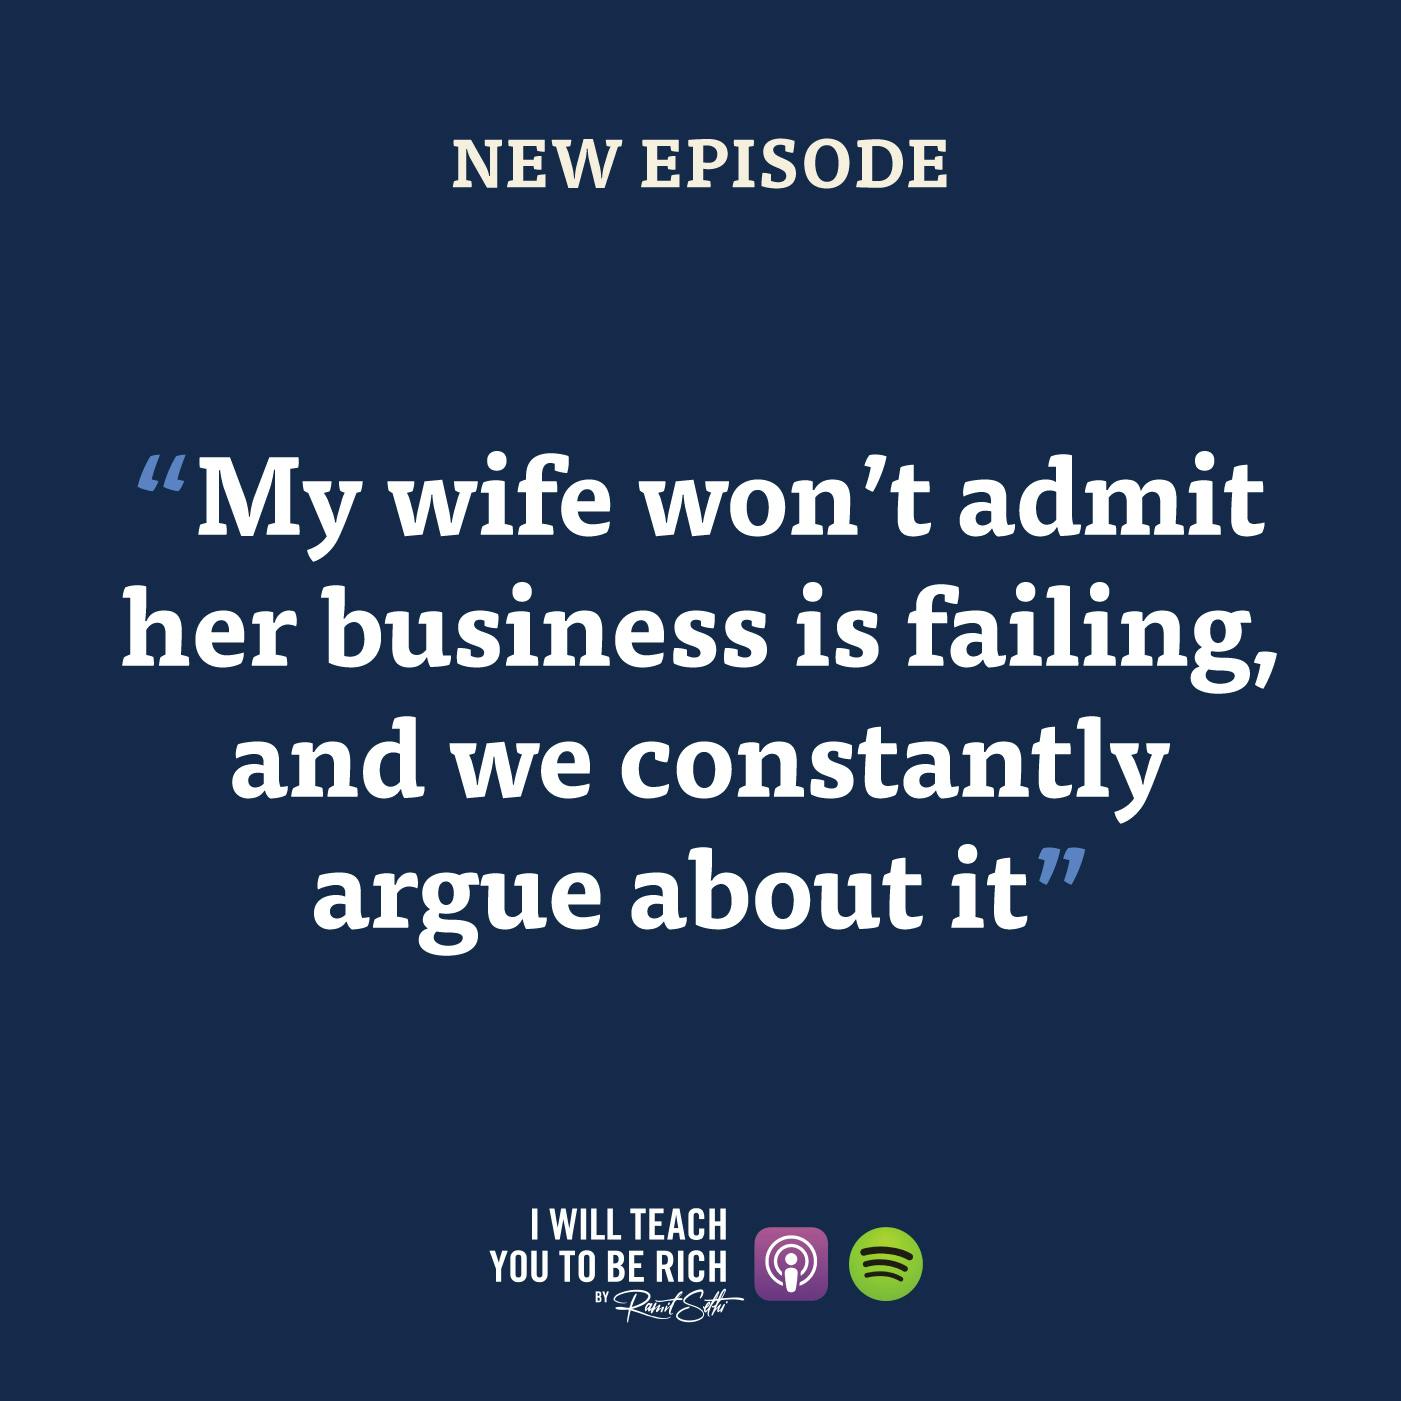 41. “My wife won’t admit her business is failing and we constantly argue about it”